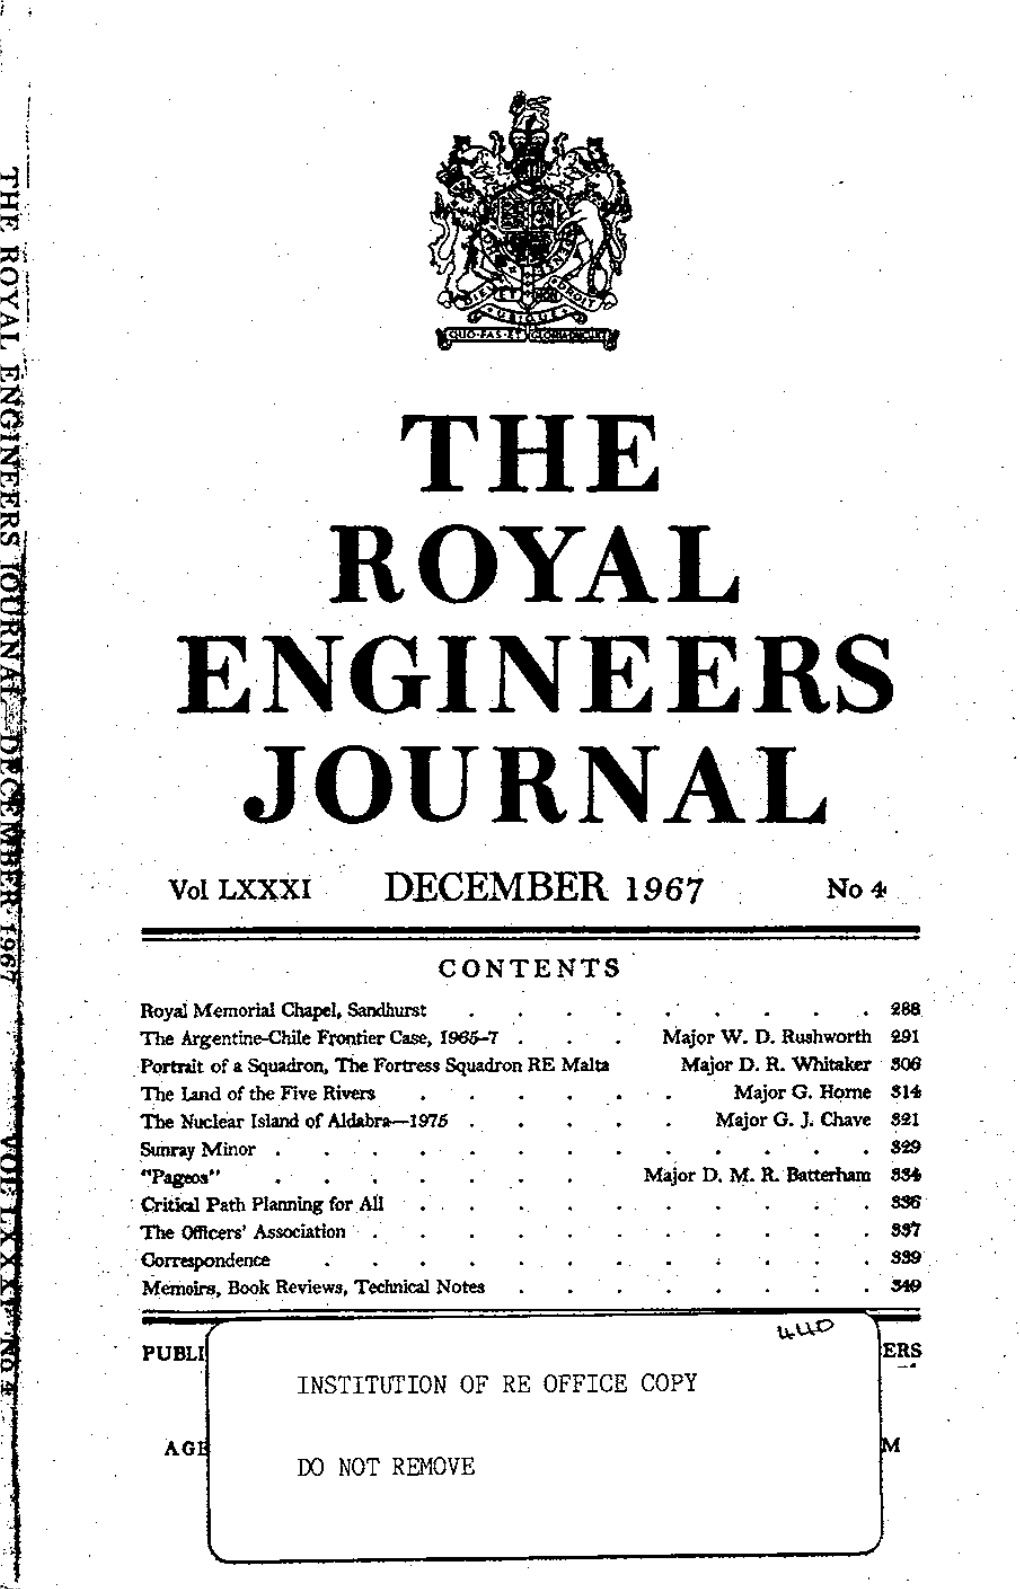 THE ROYAL ENGINEERS JOURNAL Vol LXXXI DECEMBER 1967 No 4